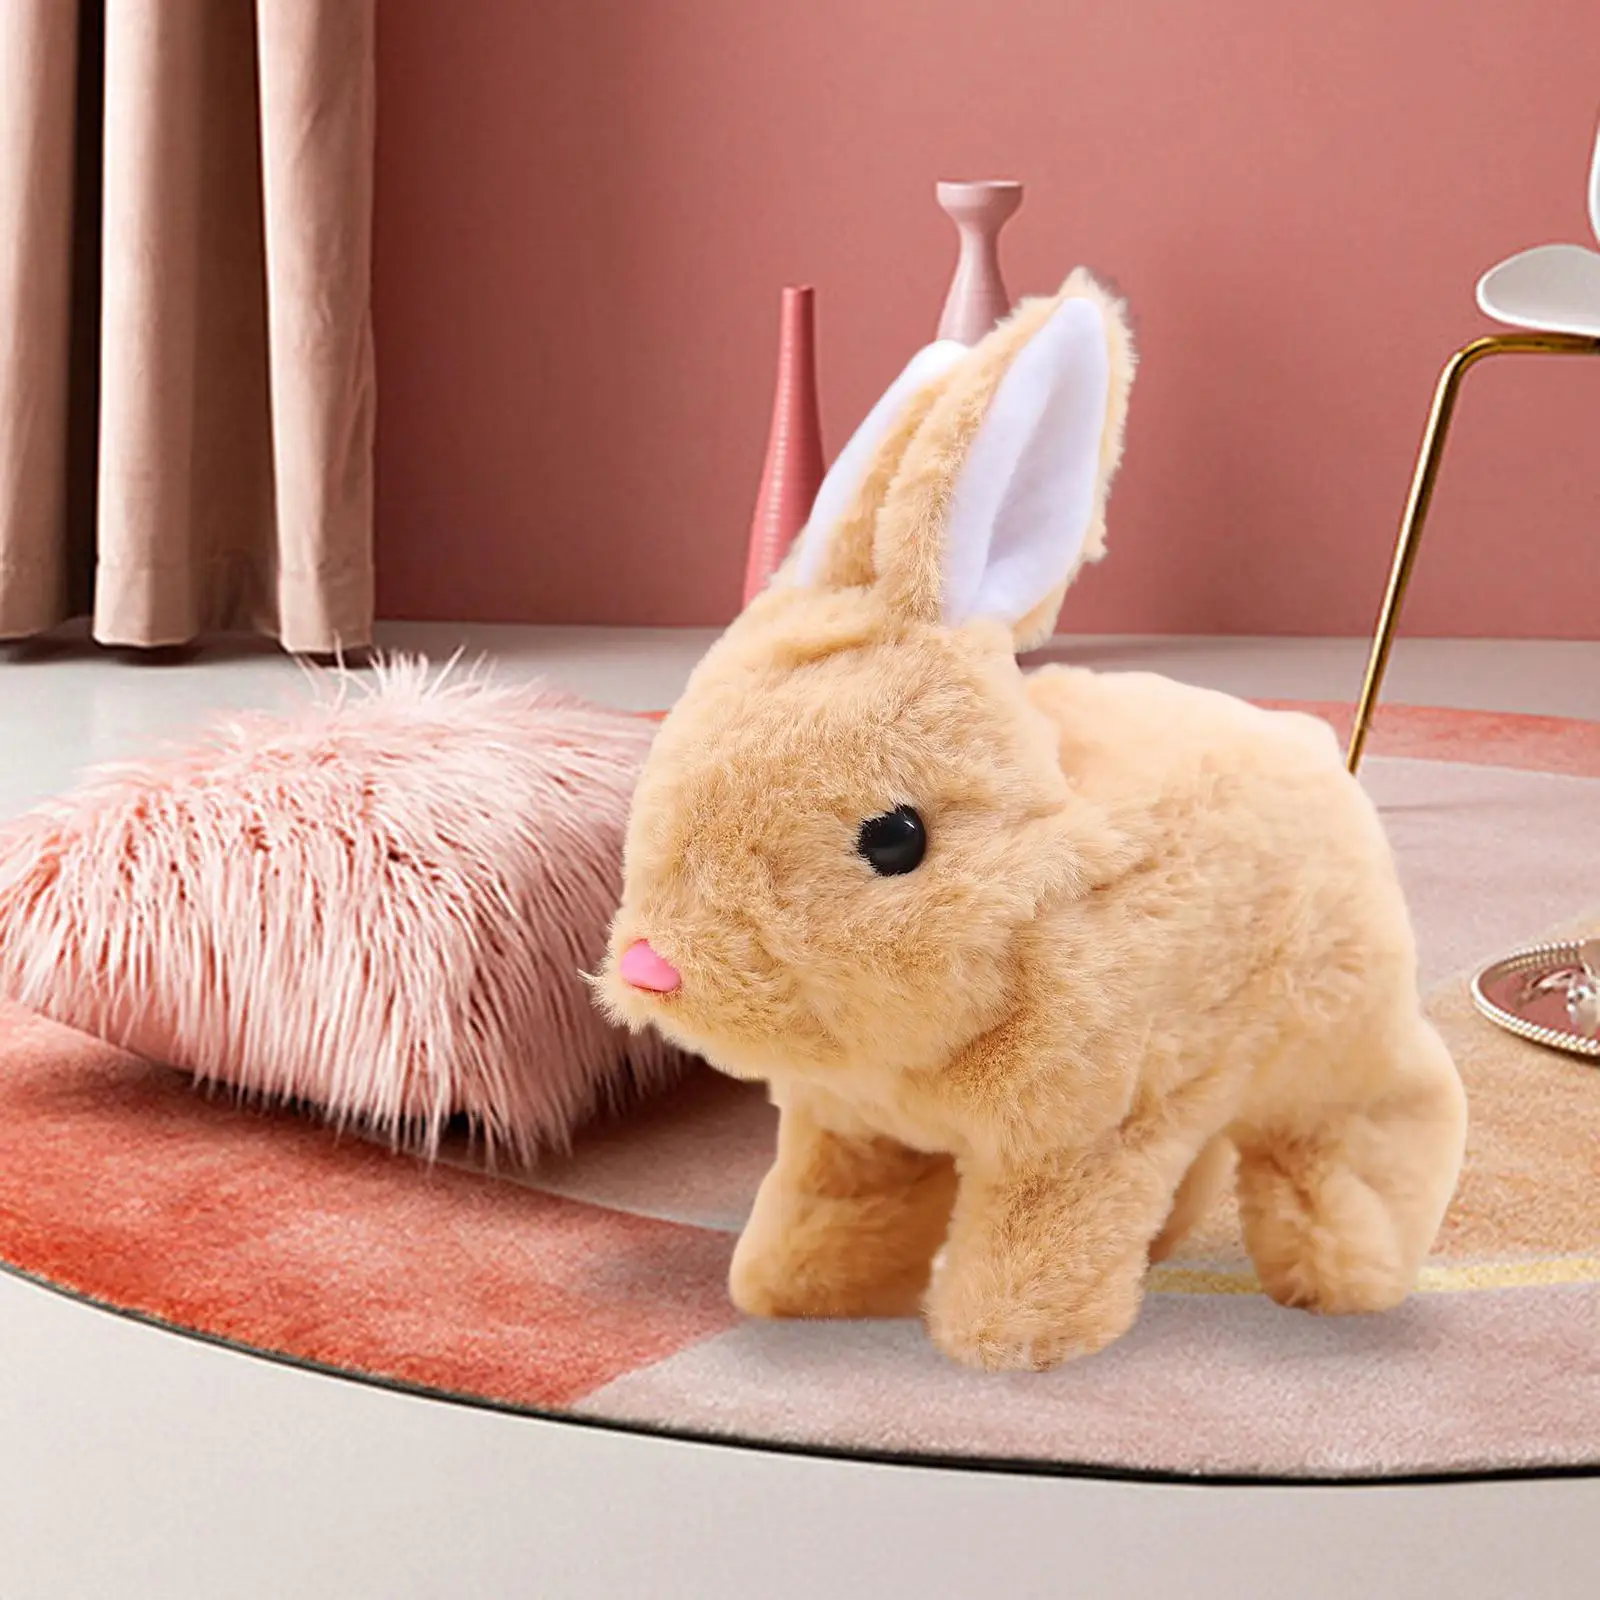 Electronic Plush Rabbit Toy Stuffed Animal Lovely for Girls and Boys Kids